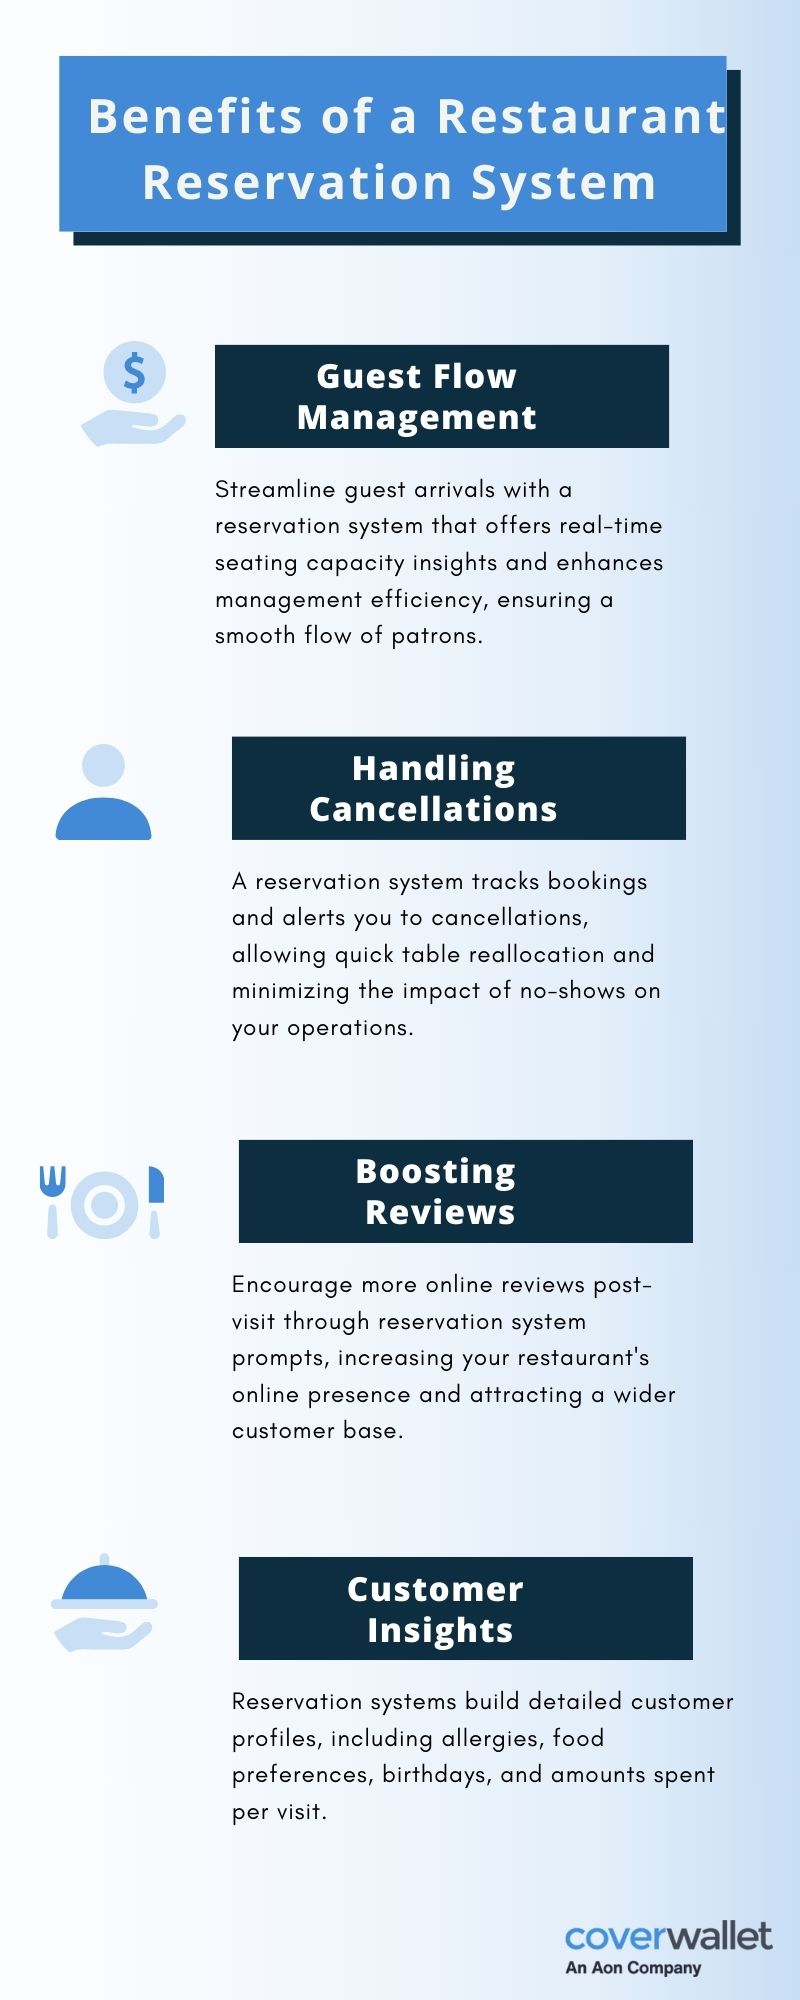 [INFOGRAPHIC] Benefits of a Restaurant Reservation System